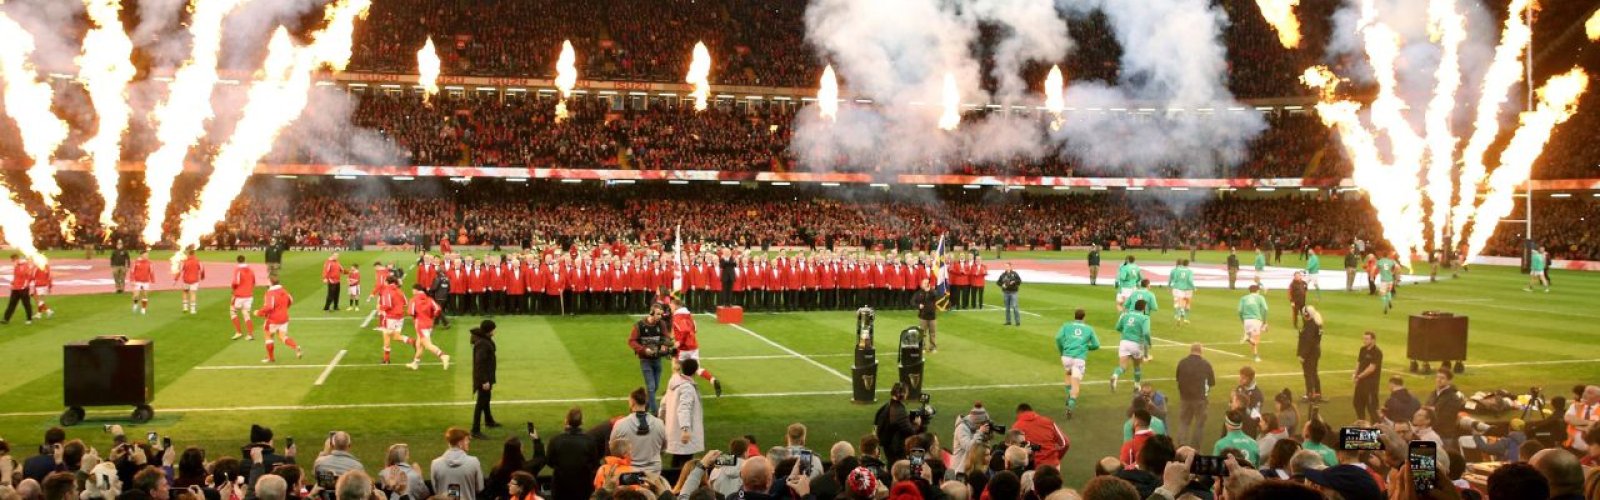 Wales v Ireland ticket hospitality package for rugby fans - Guinness Six Nations  (1).jpg